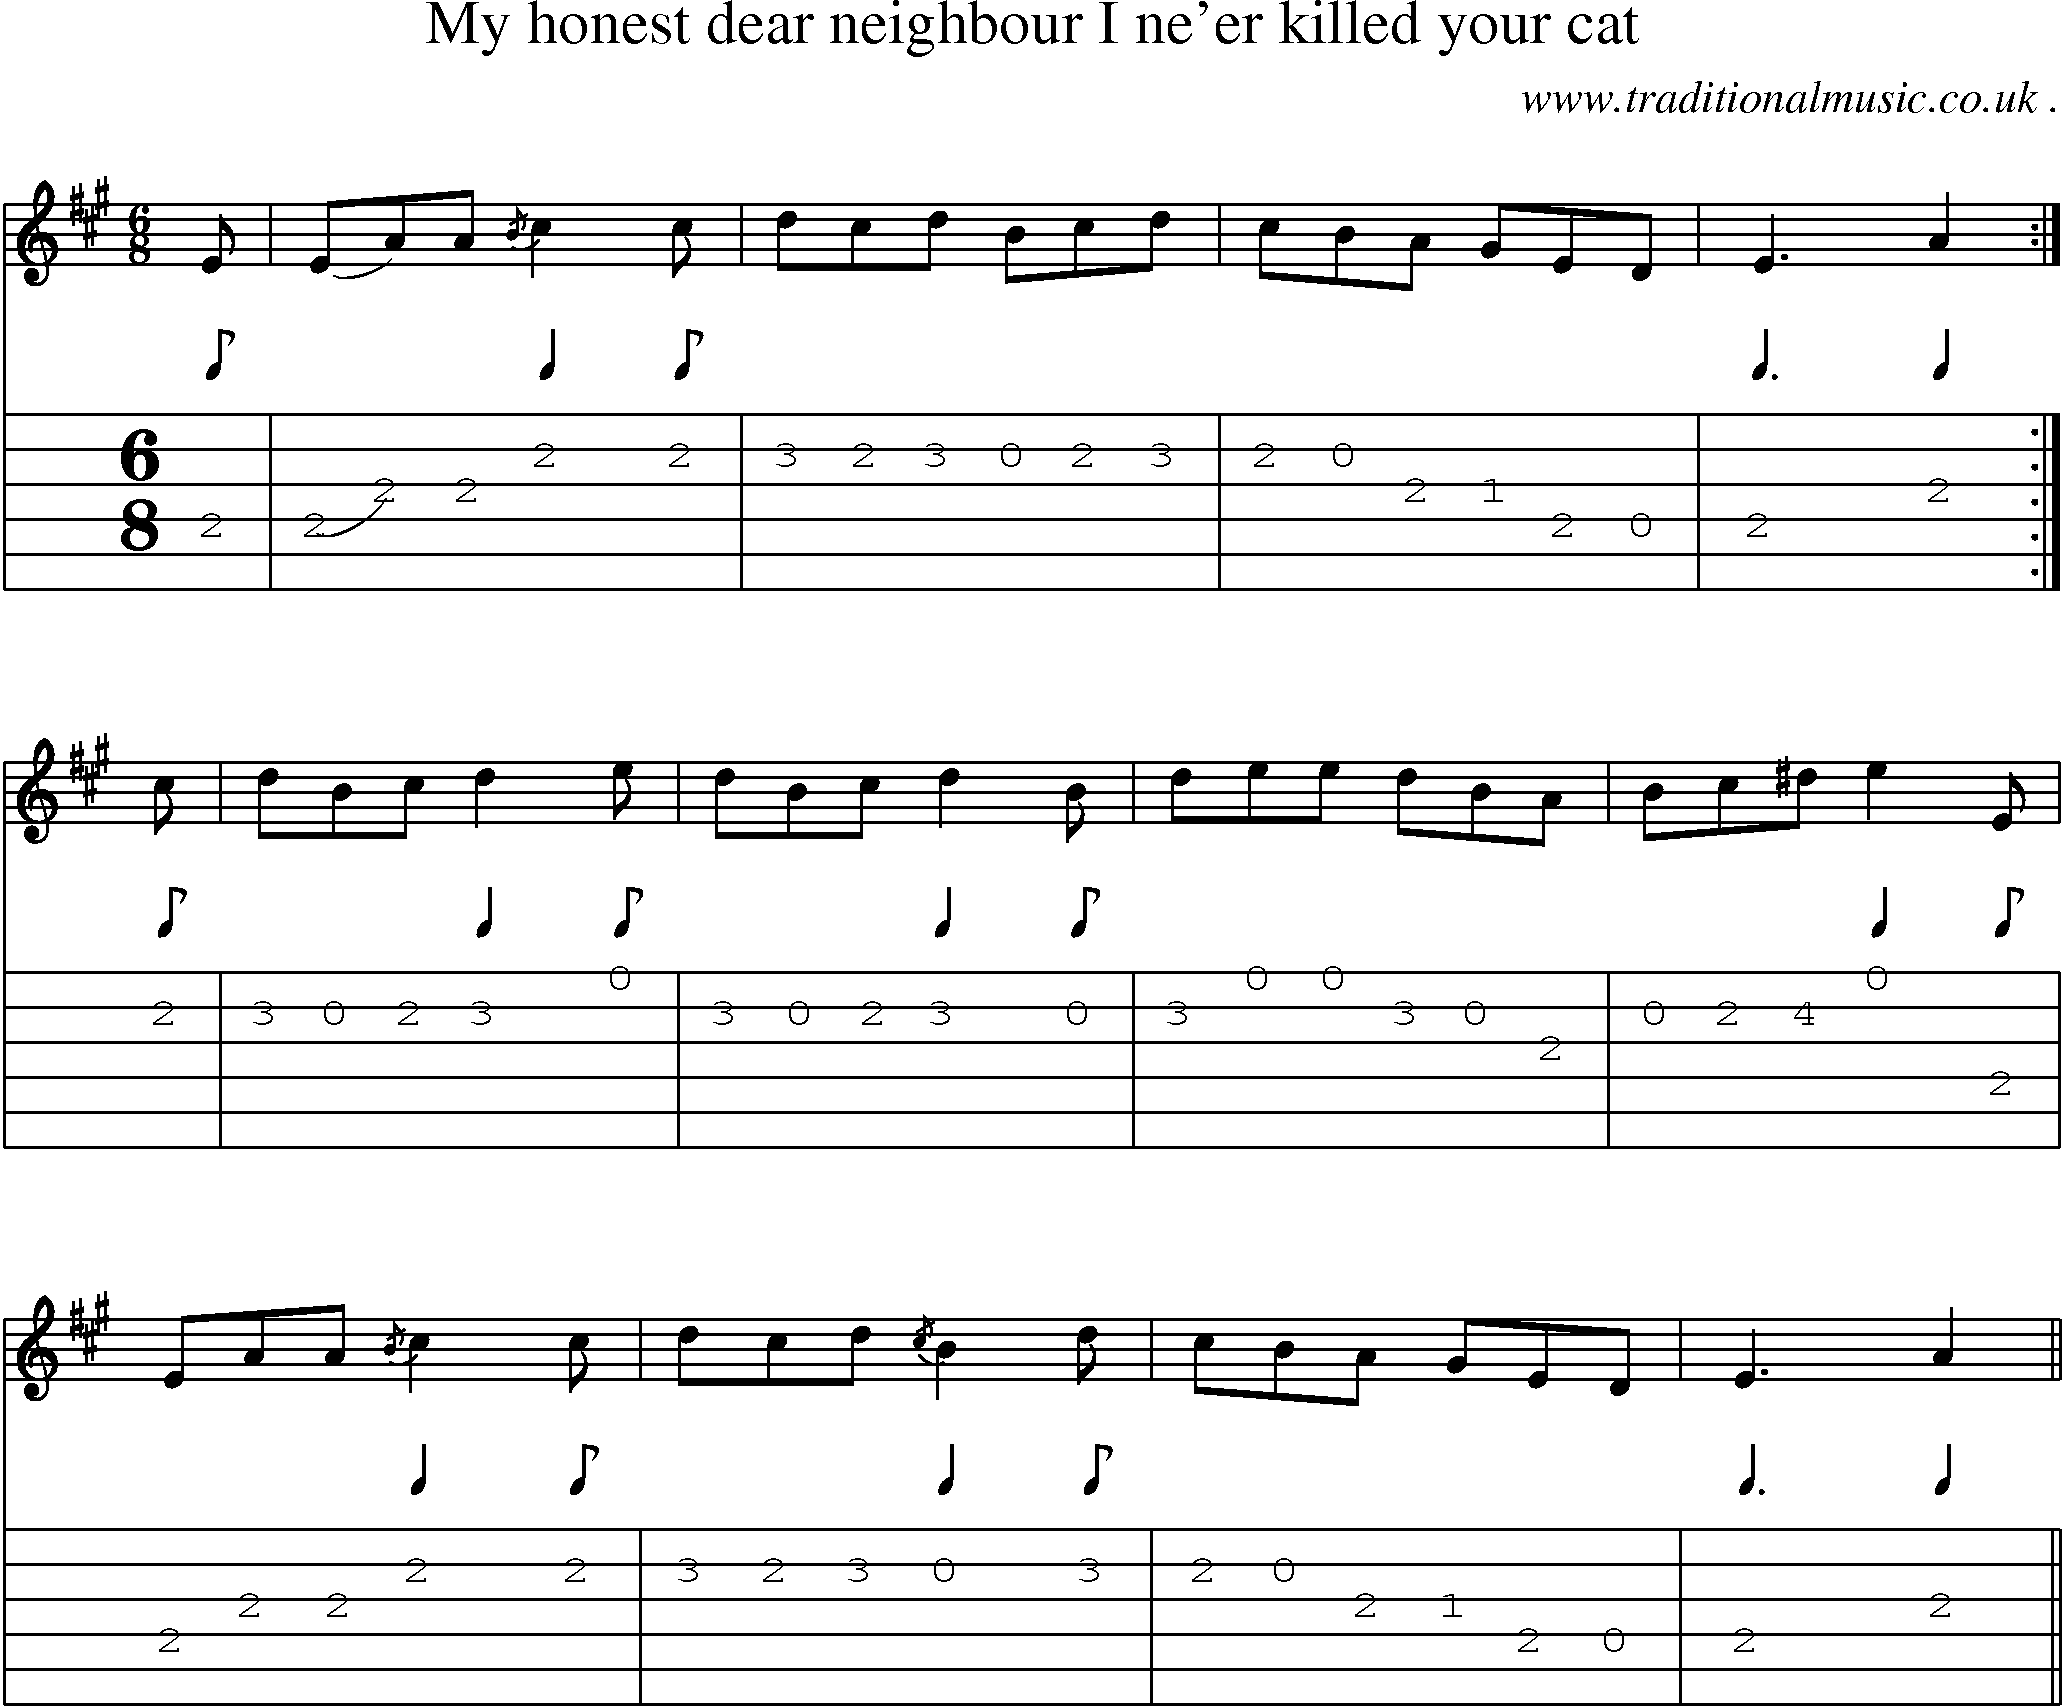 Sheet-music  score, Chords and Guitar Tabs for My Honest Dear Neighbour I Neer Killed Your Cat